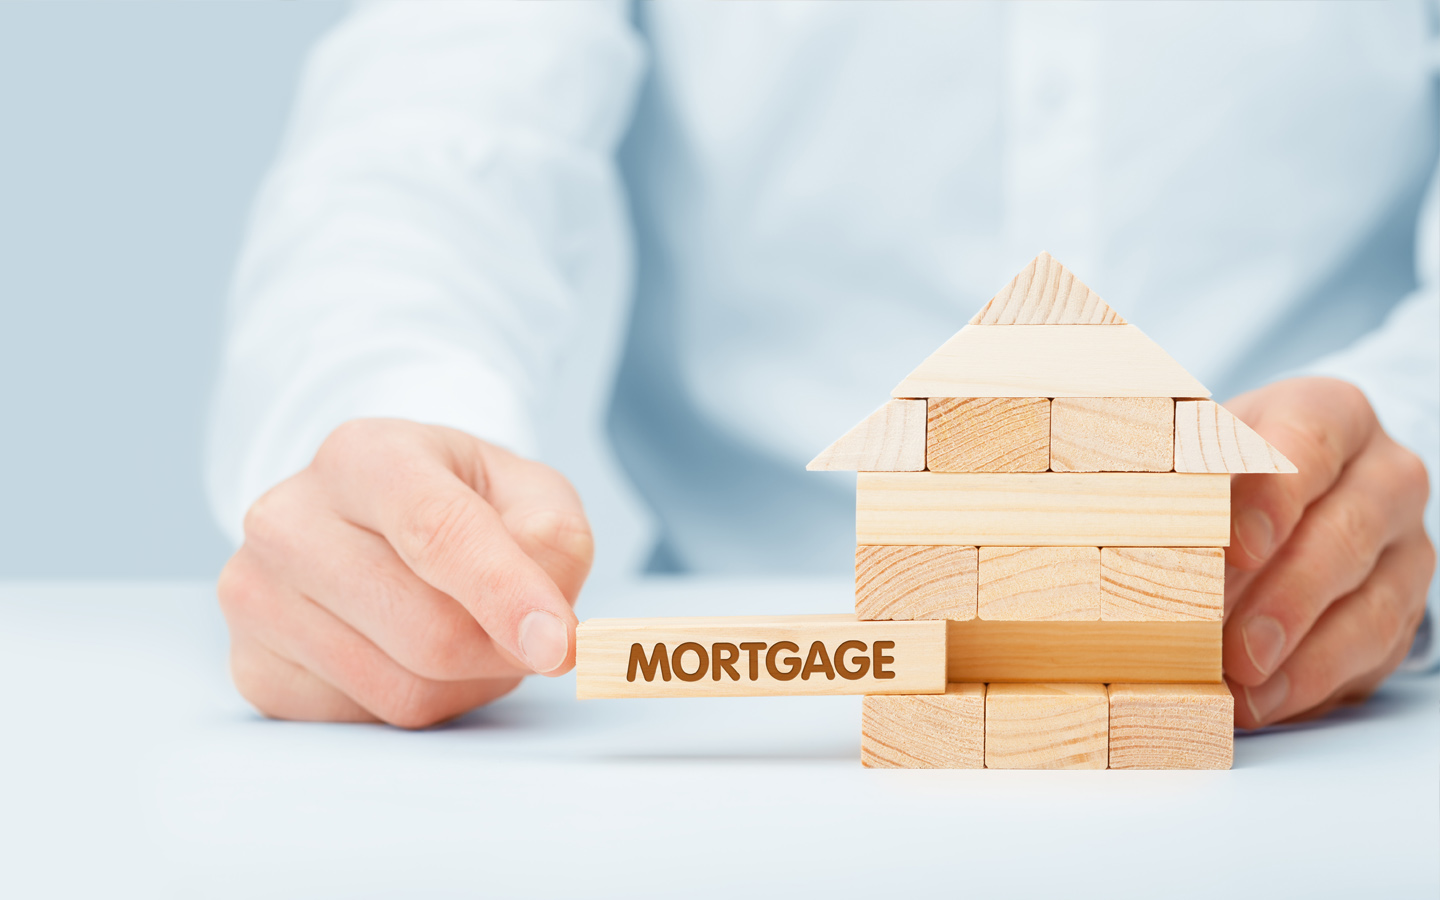 mortgage as a lender